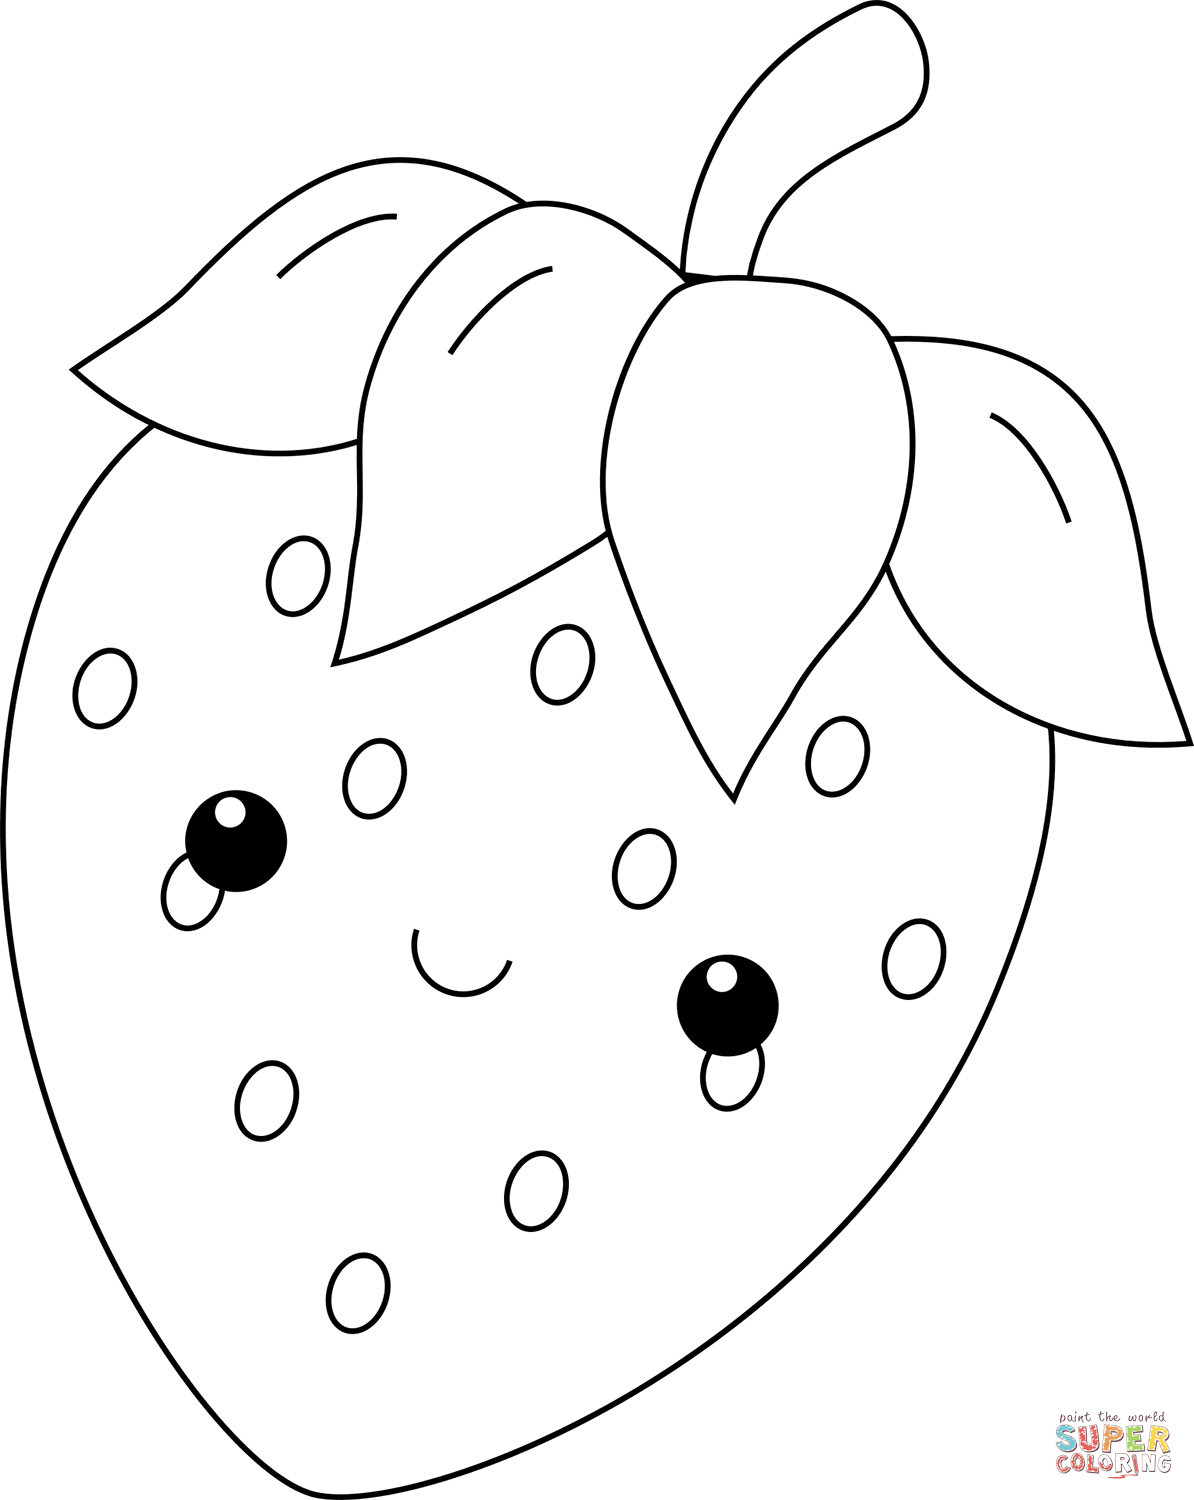 Kawaii strawberry coloring page free printable coloring pages